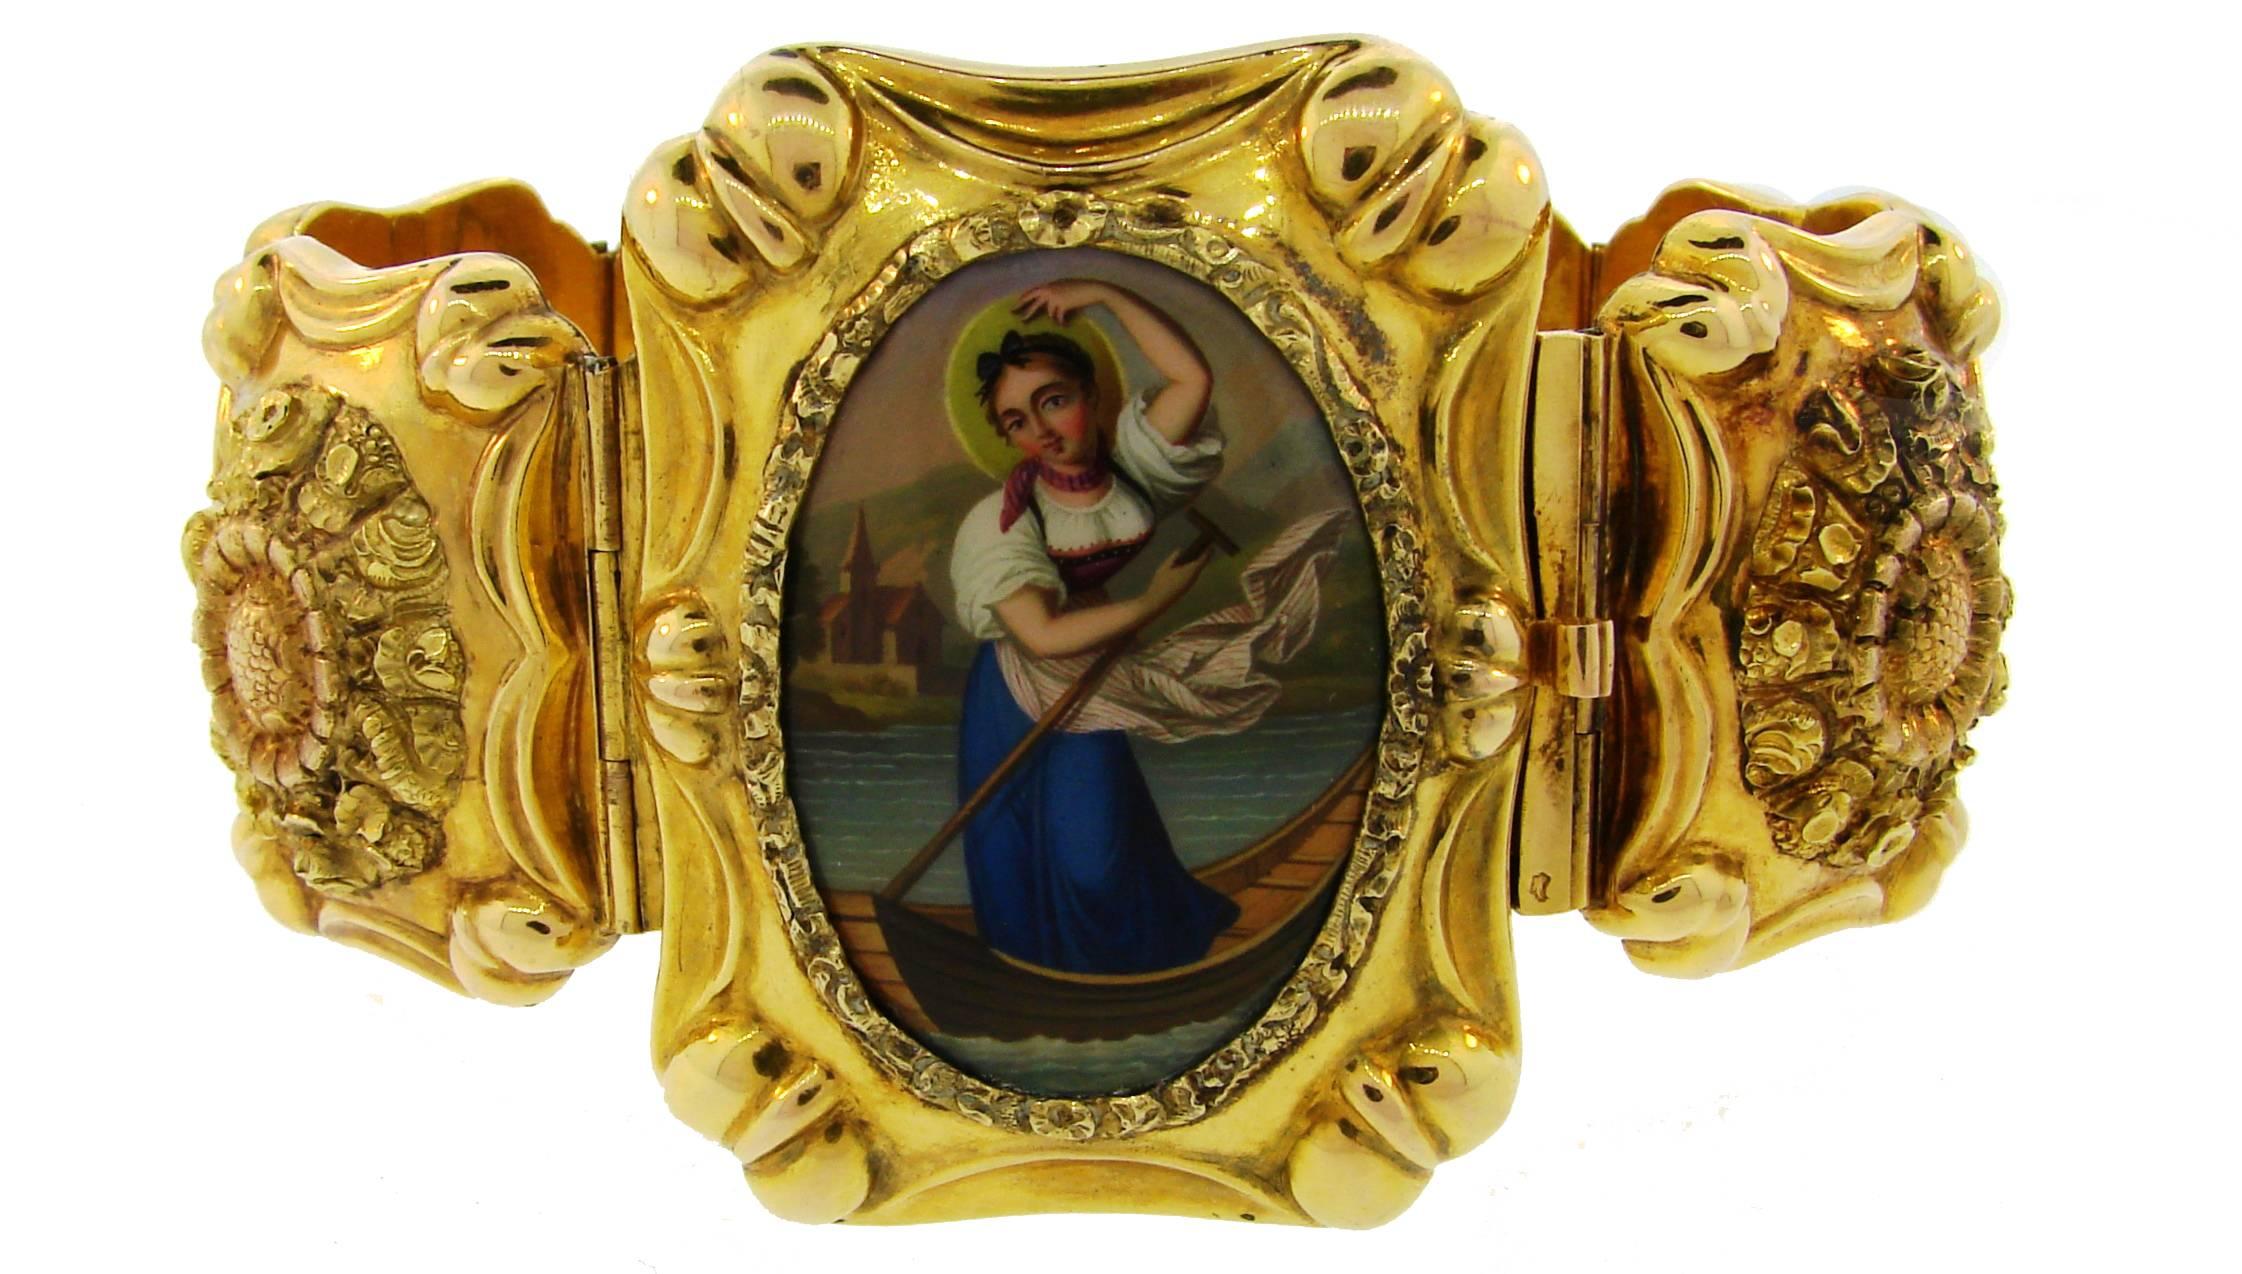 Fantastic Victorian bracelet created in France in the 1900's. Features six golden medallions with beautiful detailed floral gold work and one with a hand-painted enamel depicting a young woman in a boat. 
The bracelet is very three-dimensional and